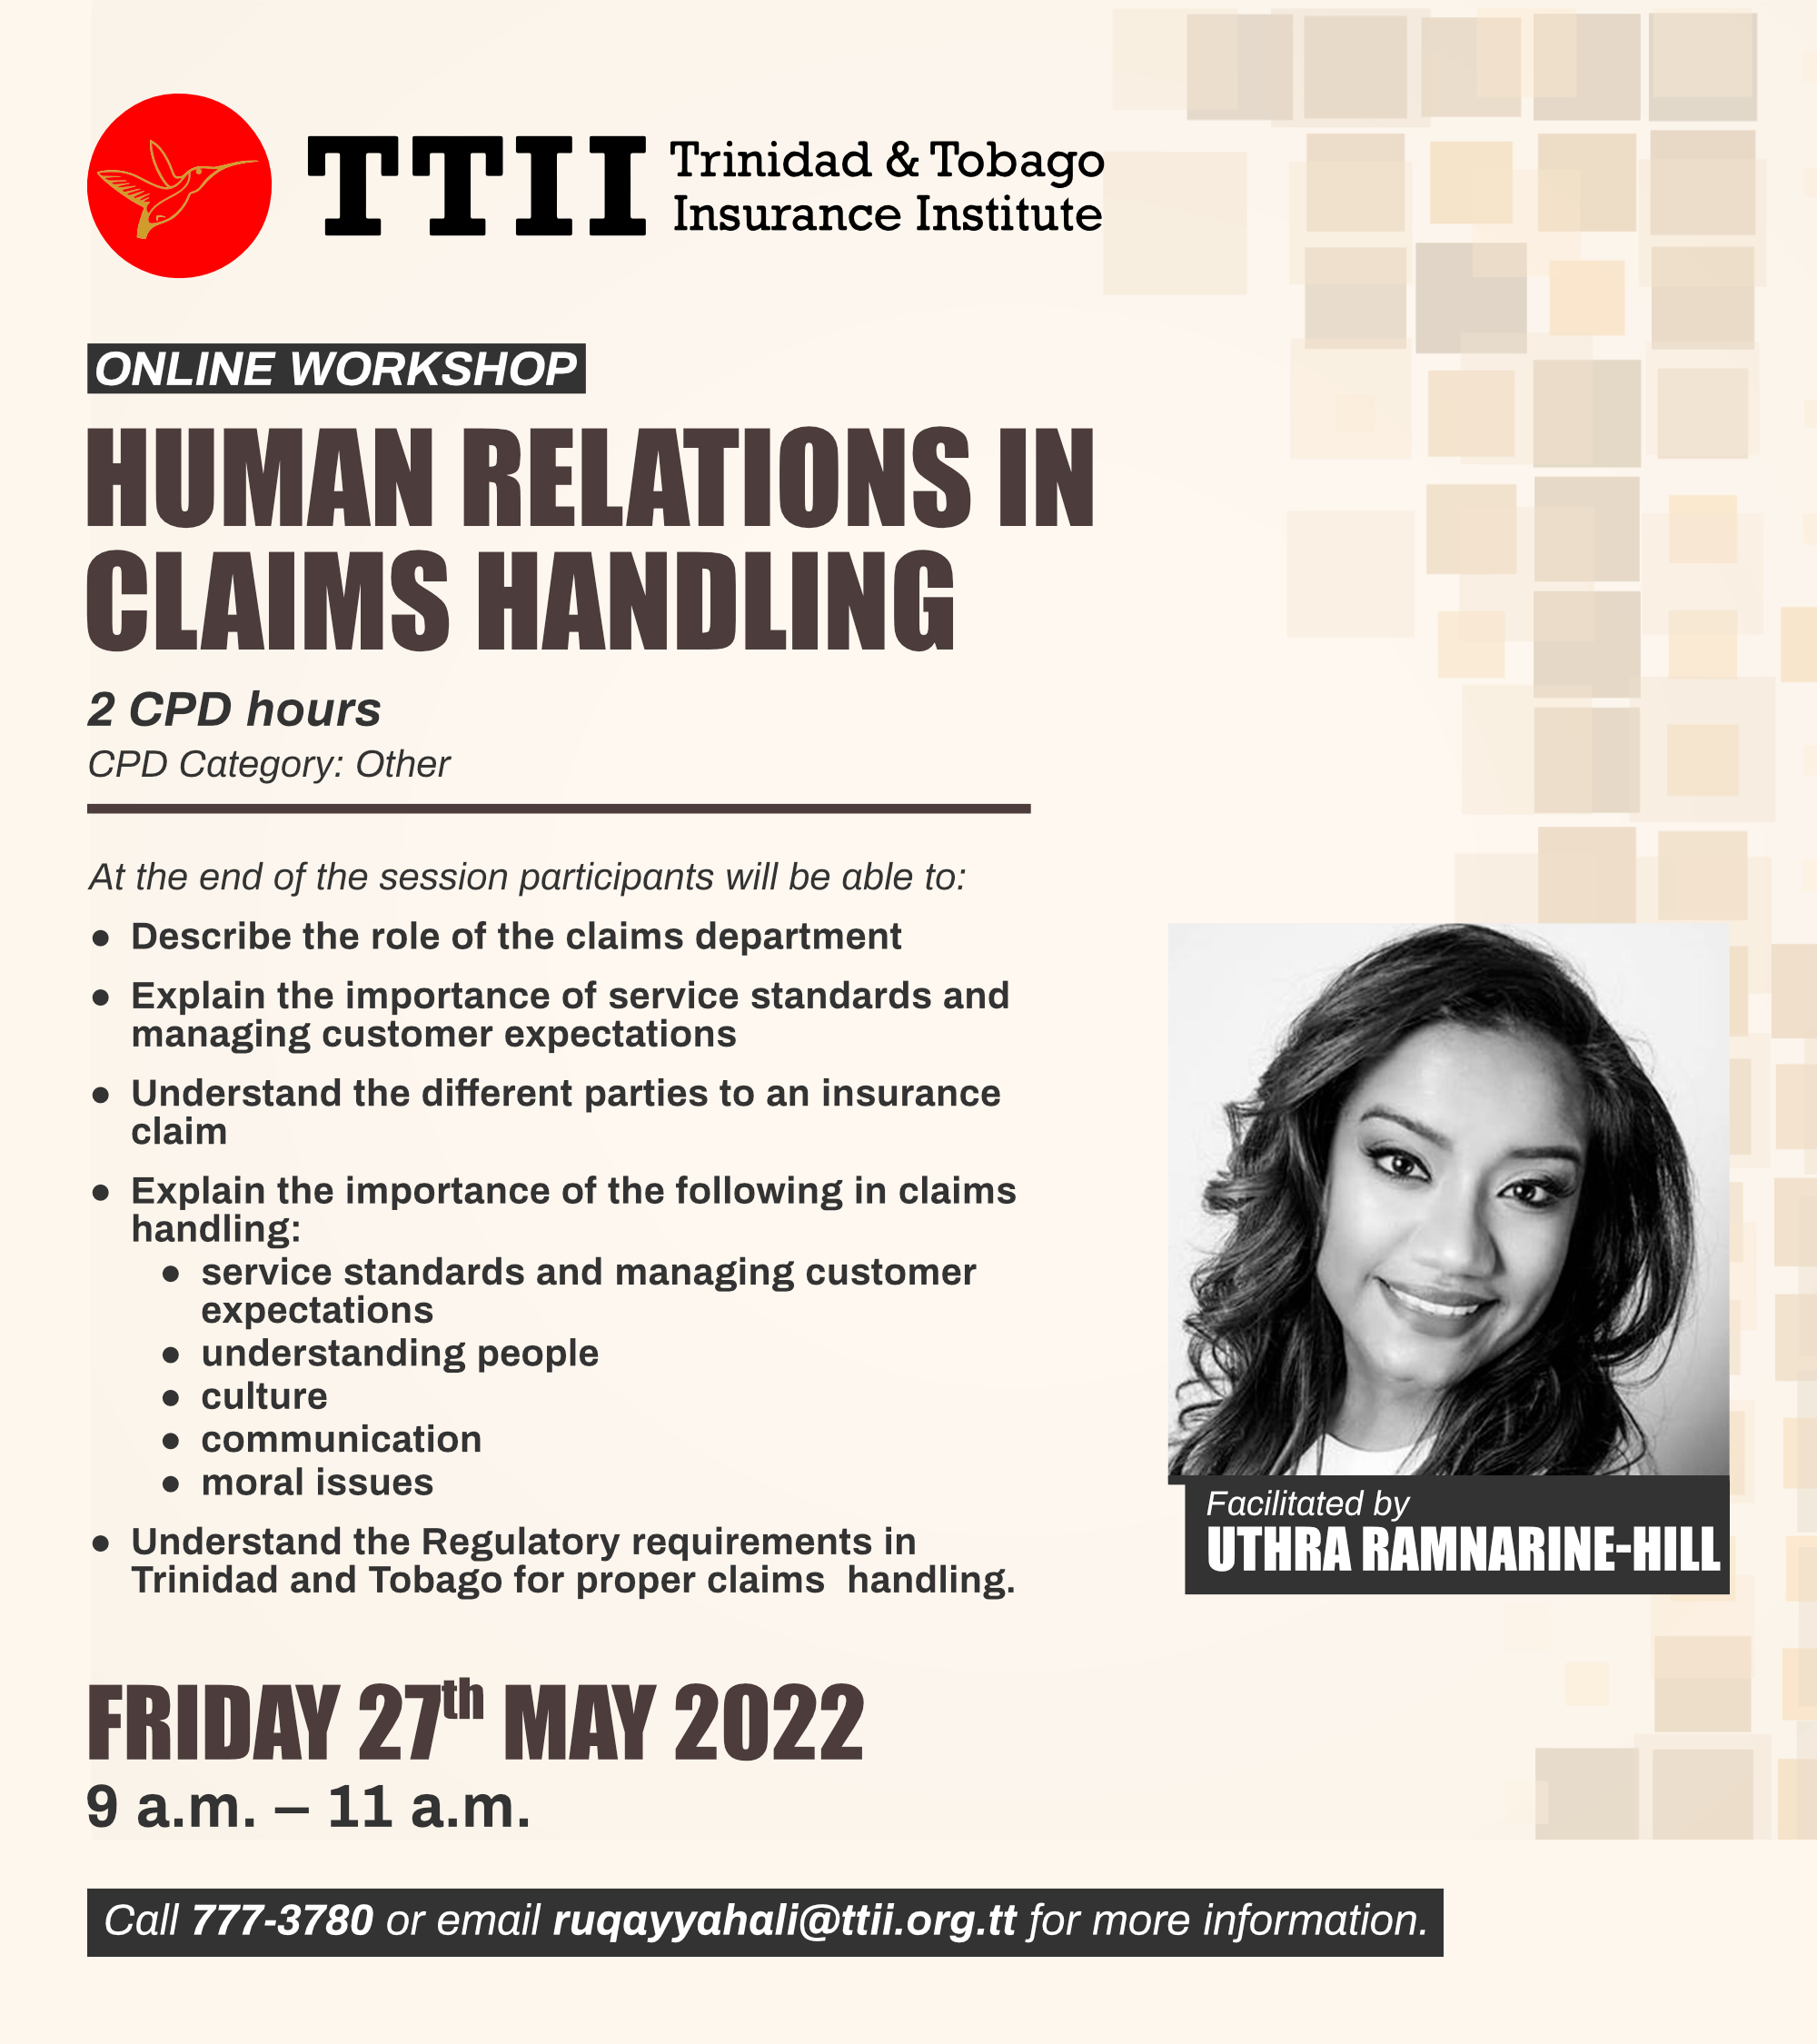 Human Relations in Claims Handling